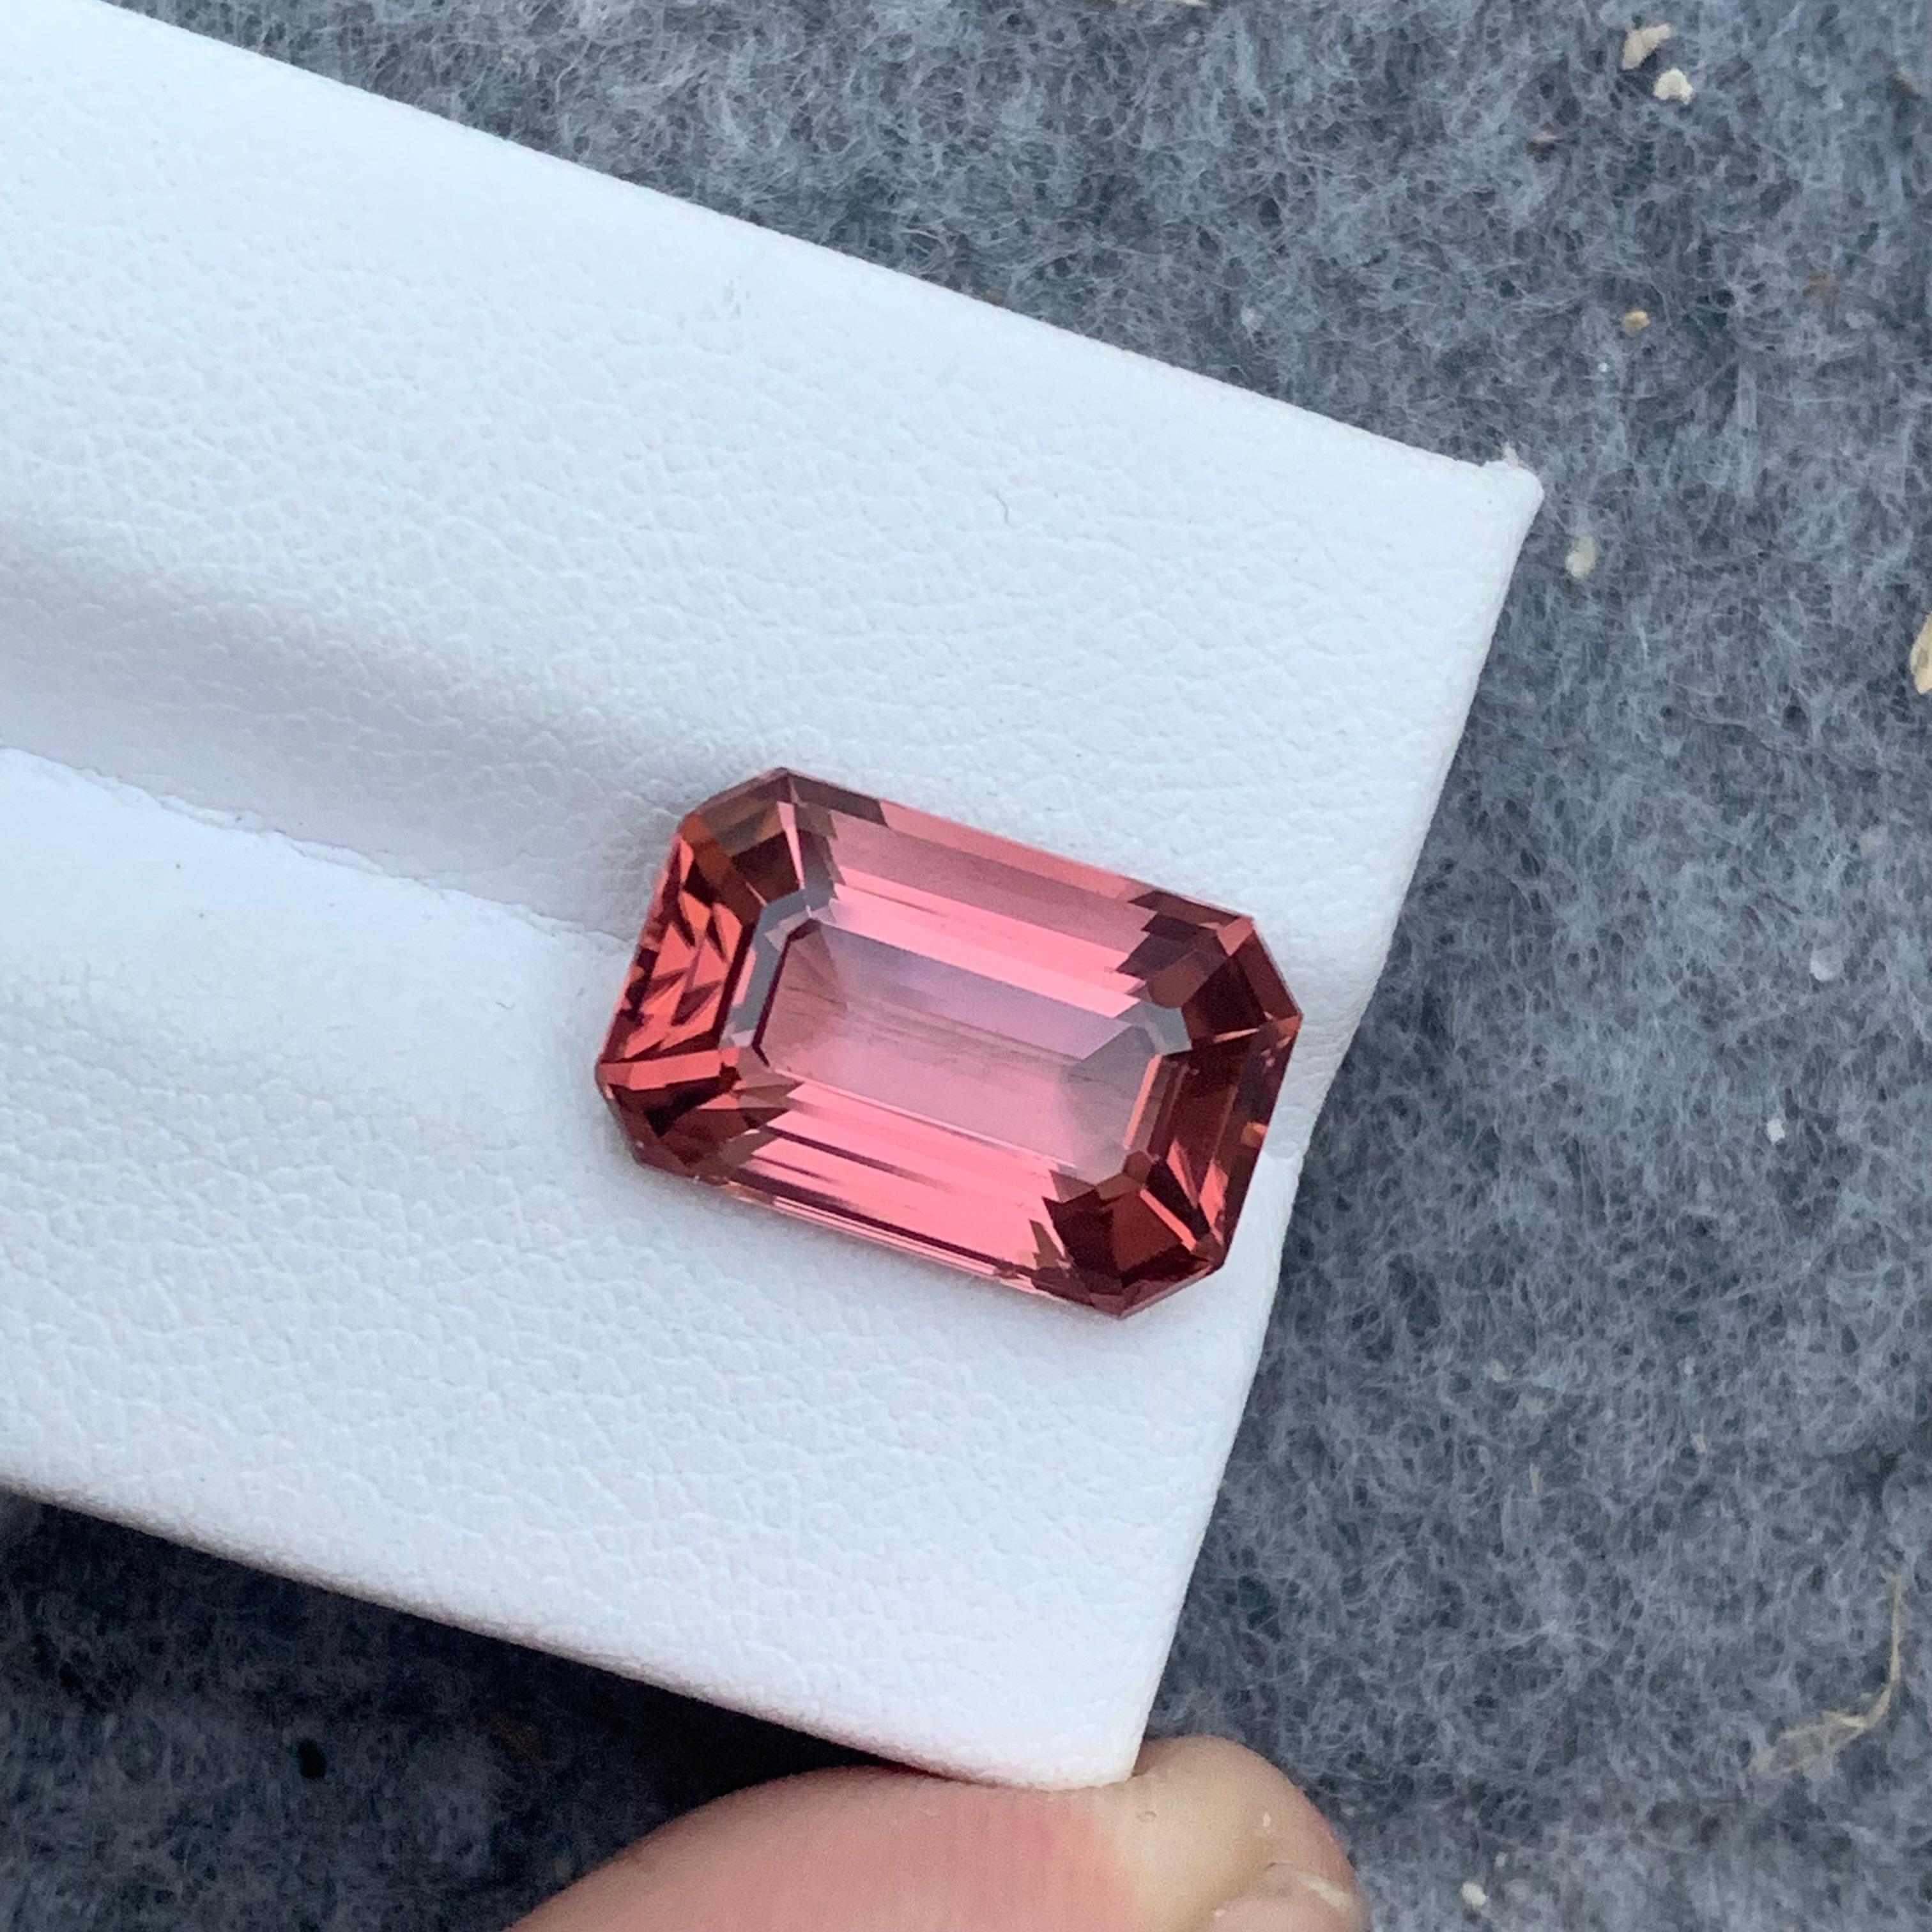 9.0 Carat AAA Quality Loose Soft Pink Tourmaline Emerald Cut From Afghanistan 6